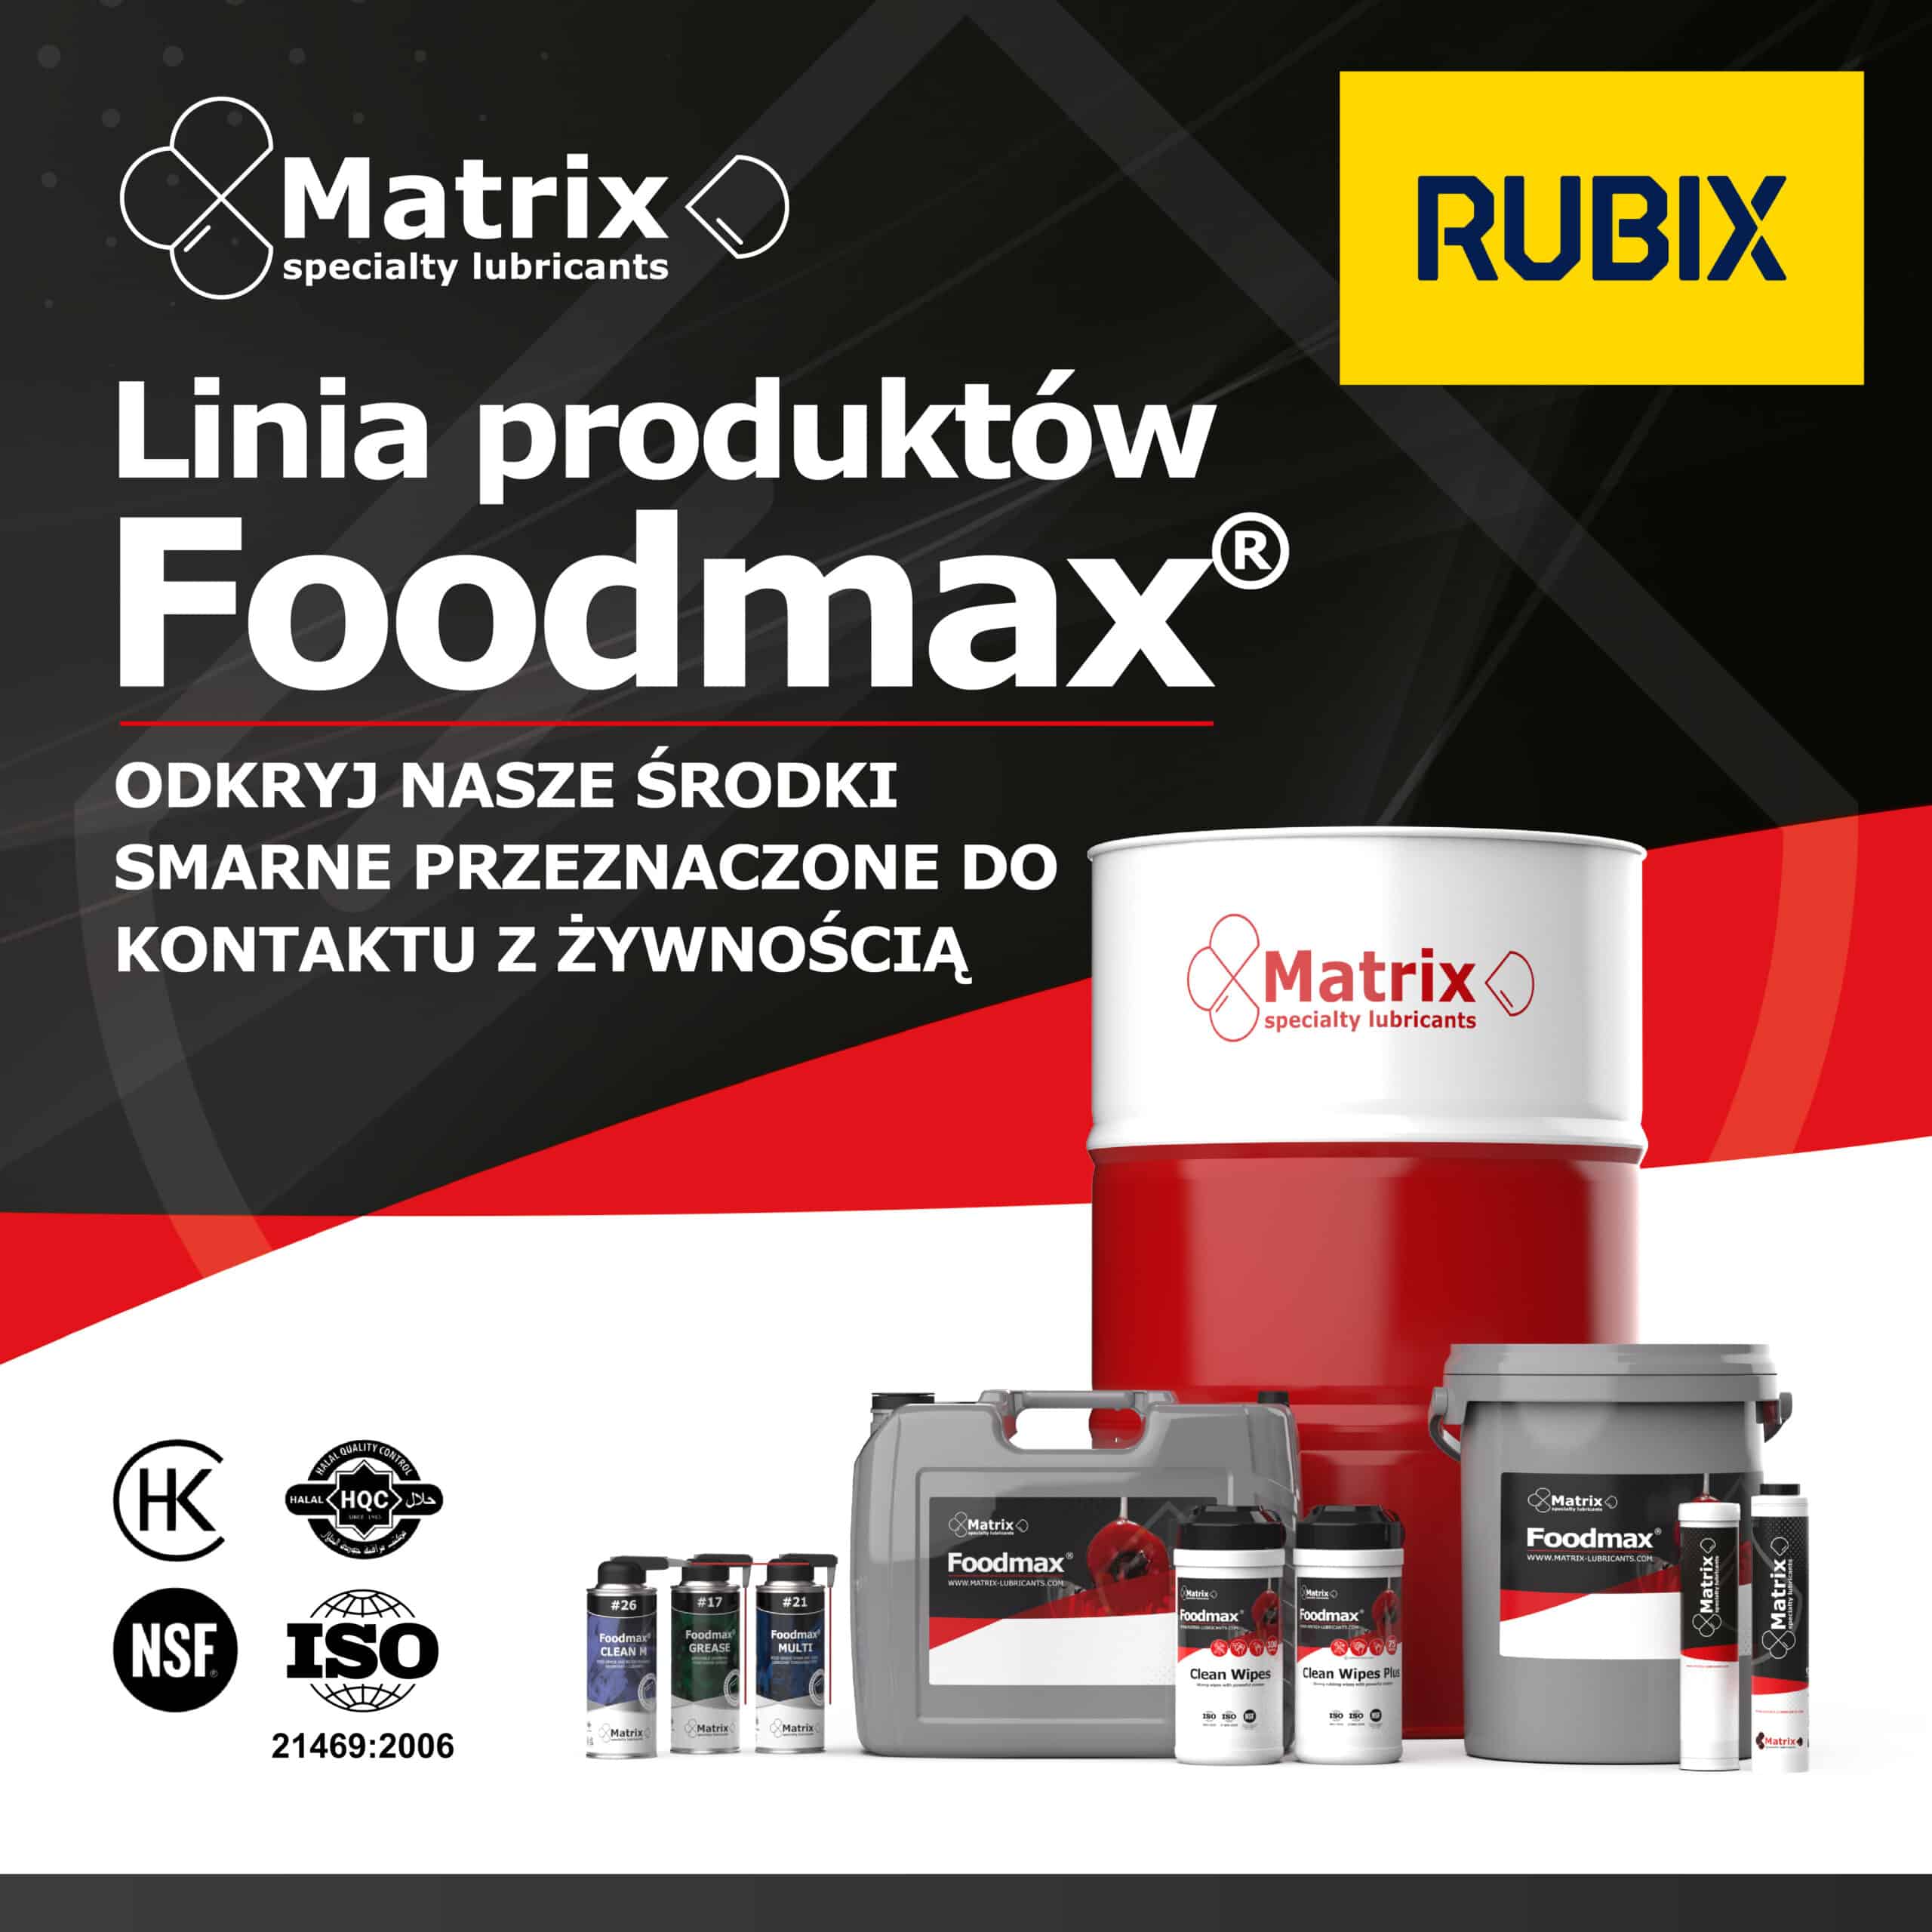 Matrix specialty lubricants Foodmax product line, collaboration with Rubix